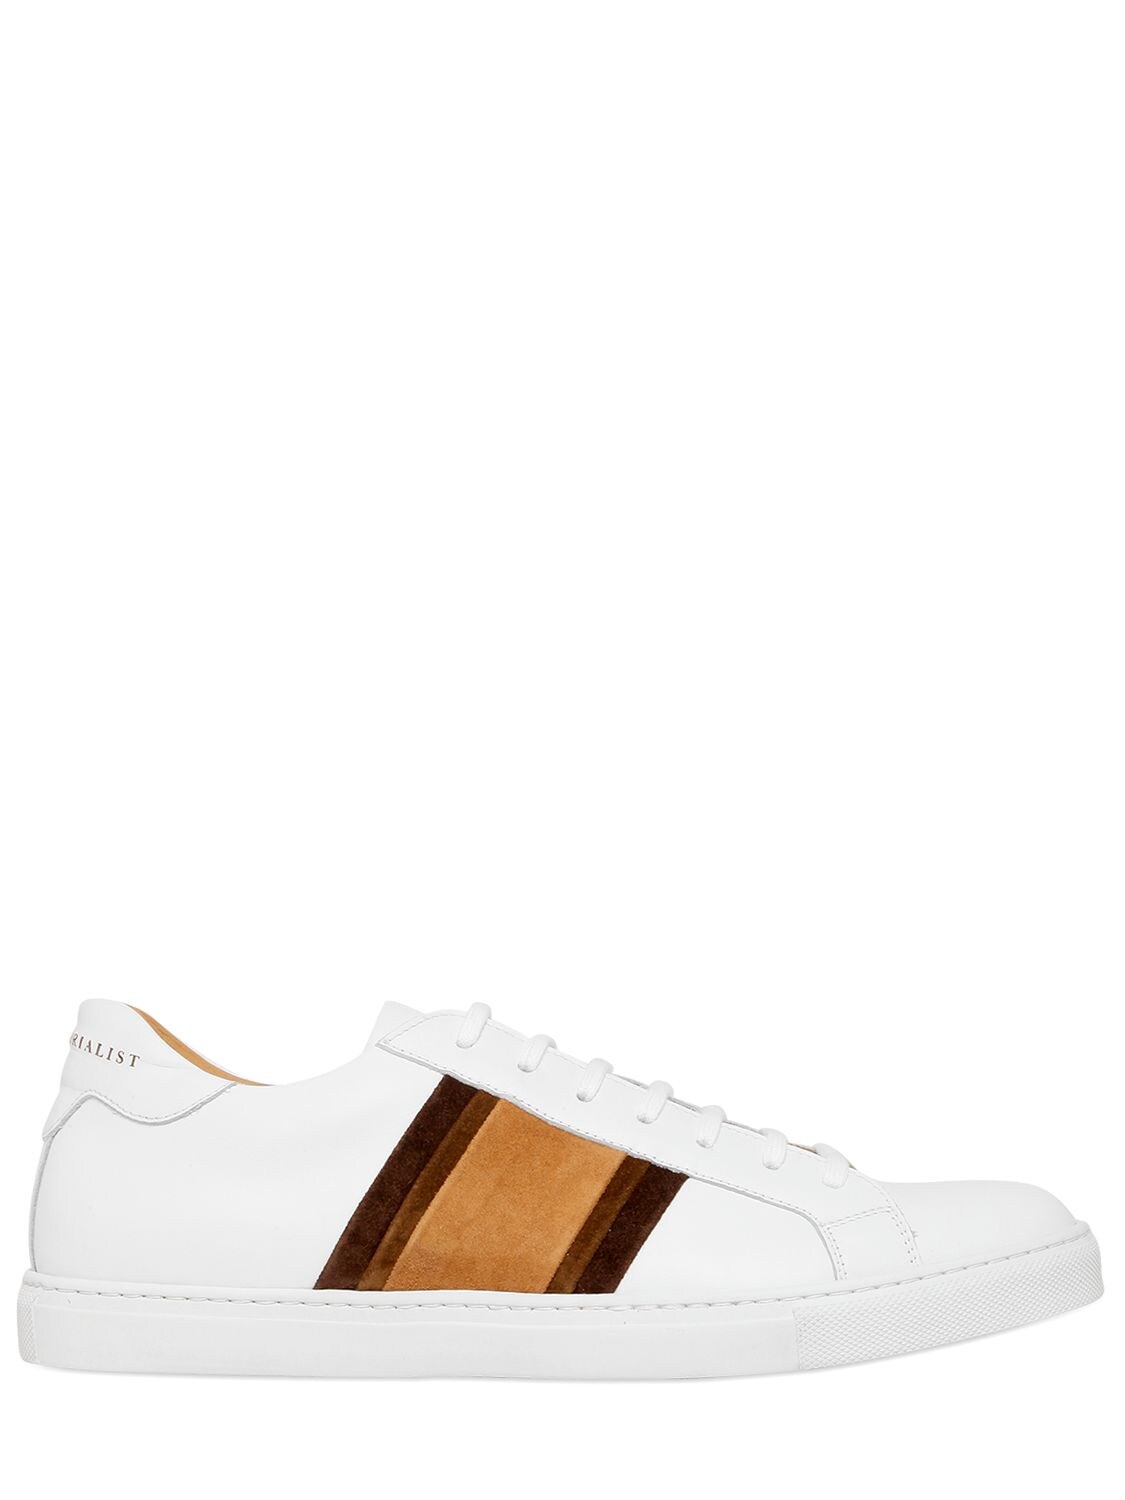 THE SARTORIALIST X SUTOR MANTELLASSI SARTORIALIST LEATHER & SUEDE SNEAKERS,65IW2W001-V0hJVEUvVE9CQUNDTy0y0